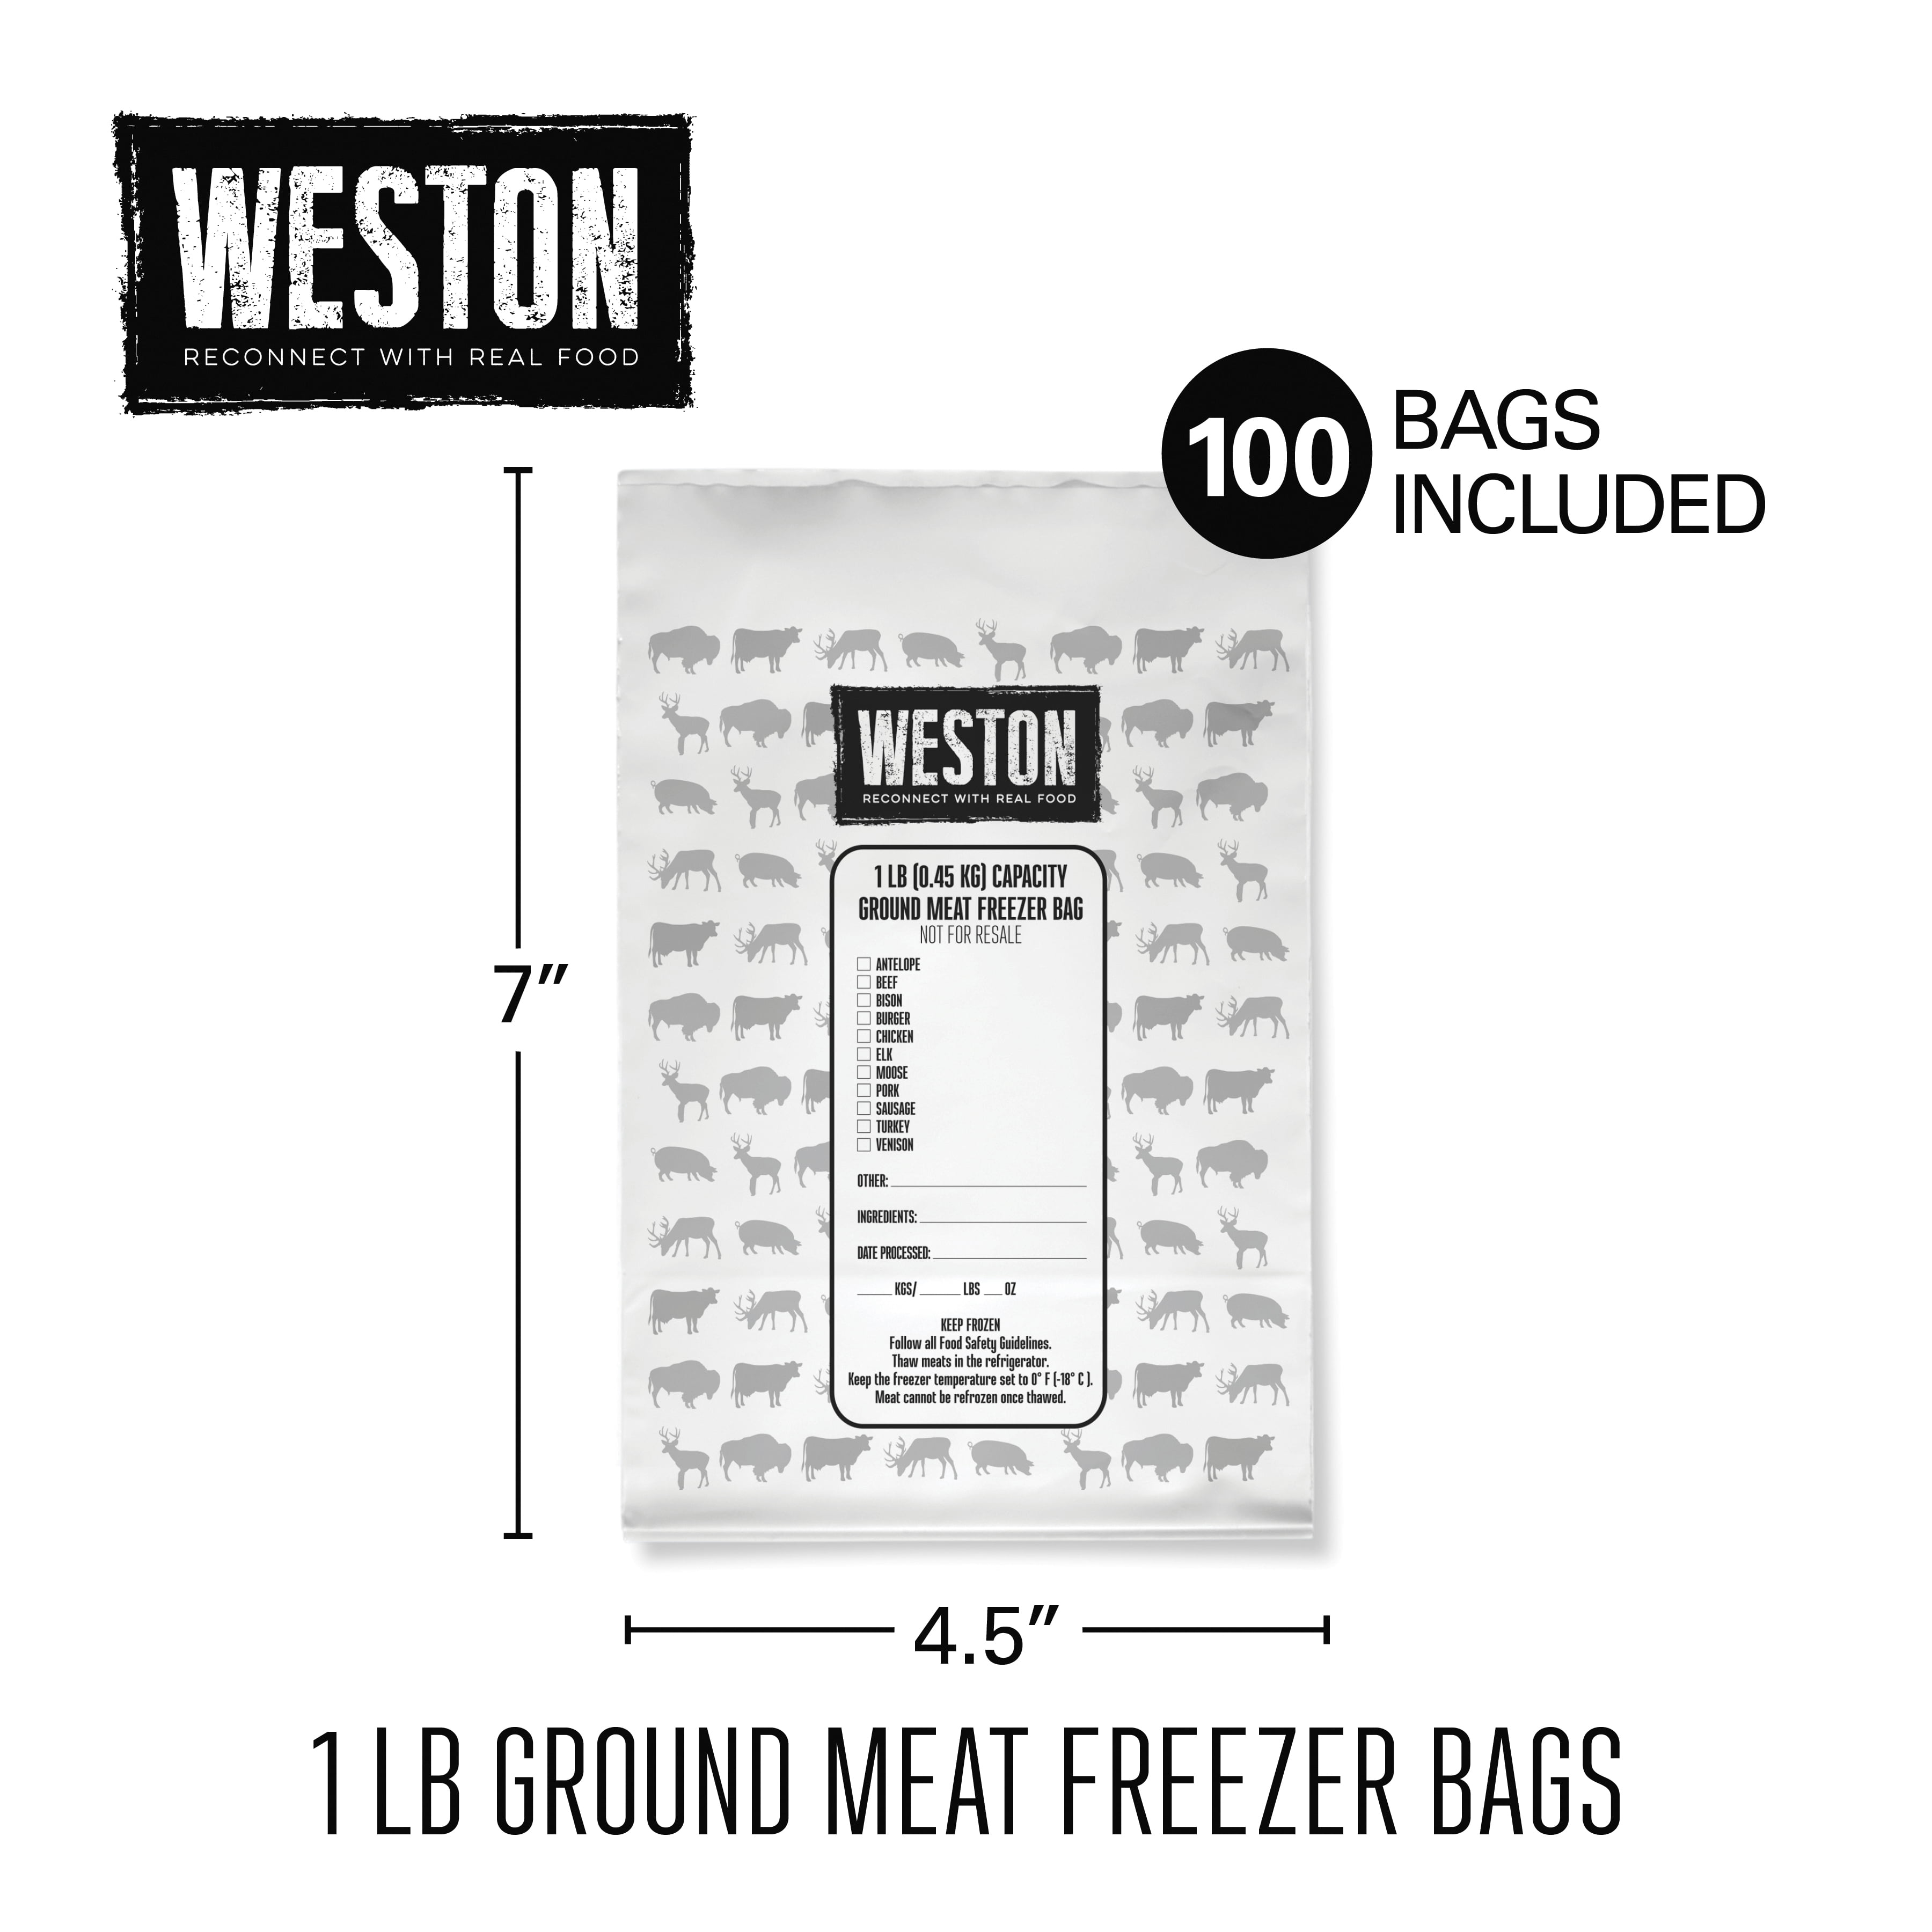  UltraSource Ground Beef Freezer Bags, 2 lb. Not For